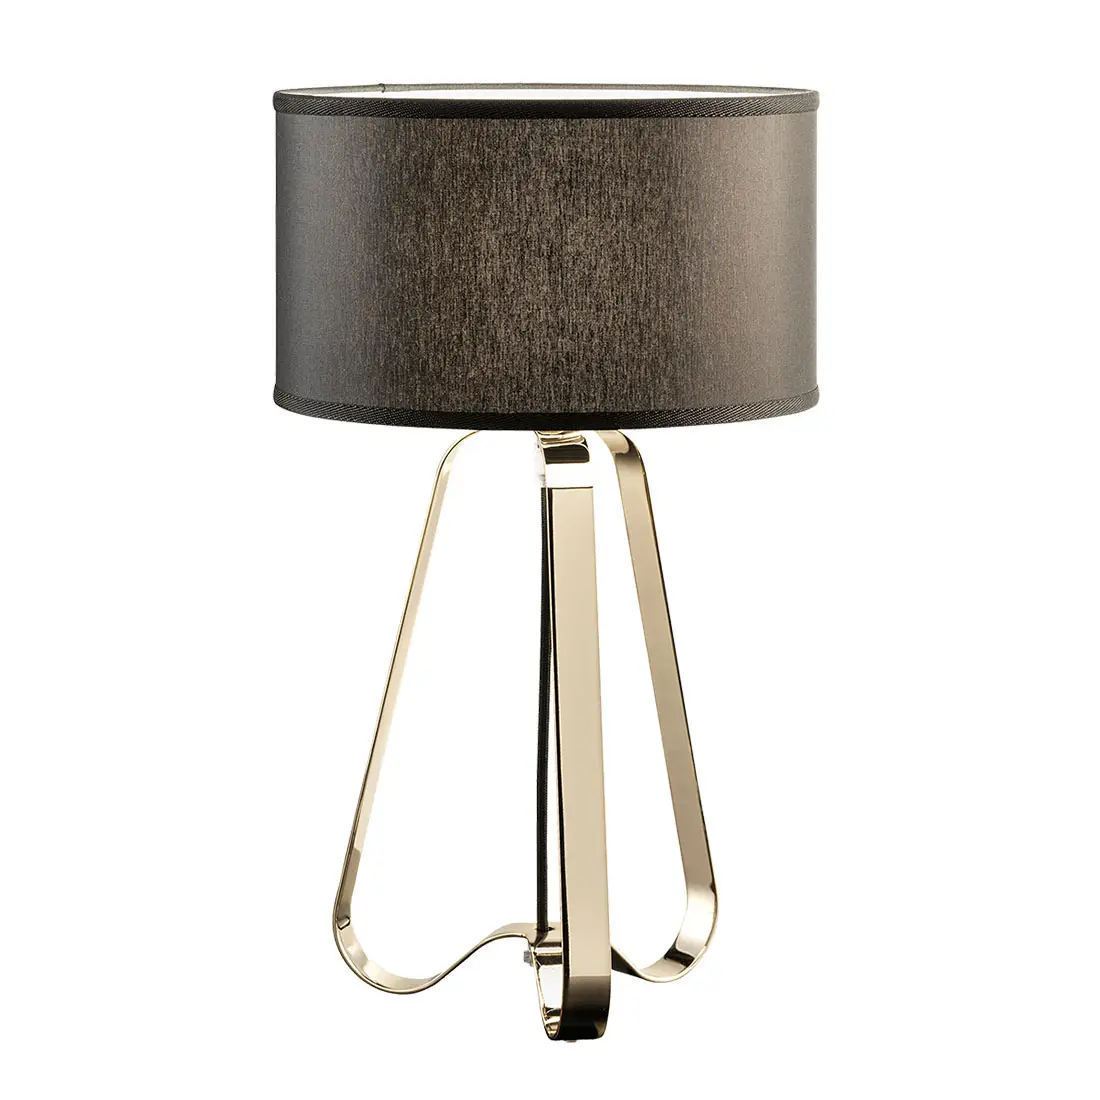 LILY by ITALAMP table lamp